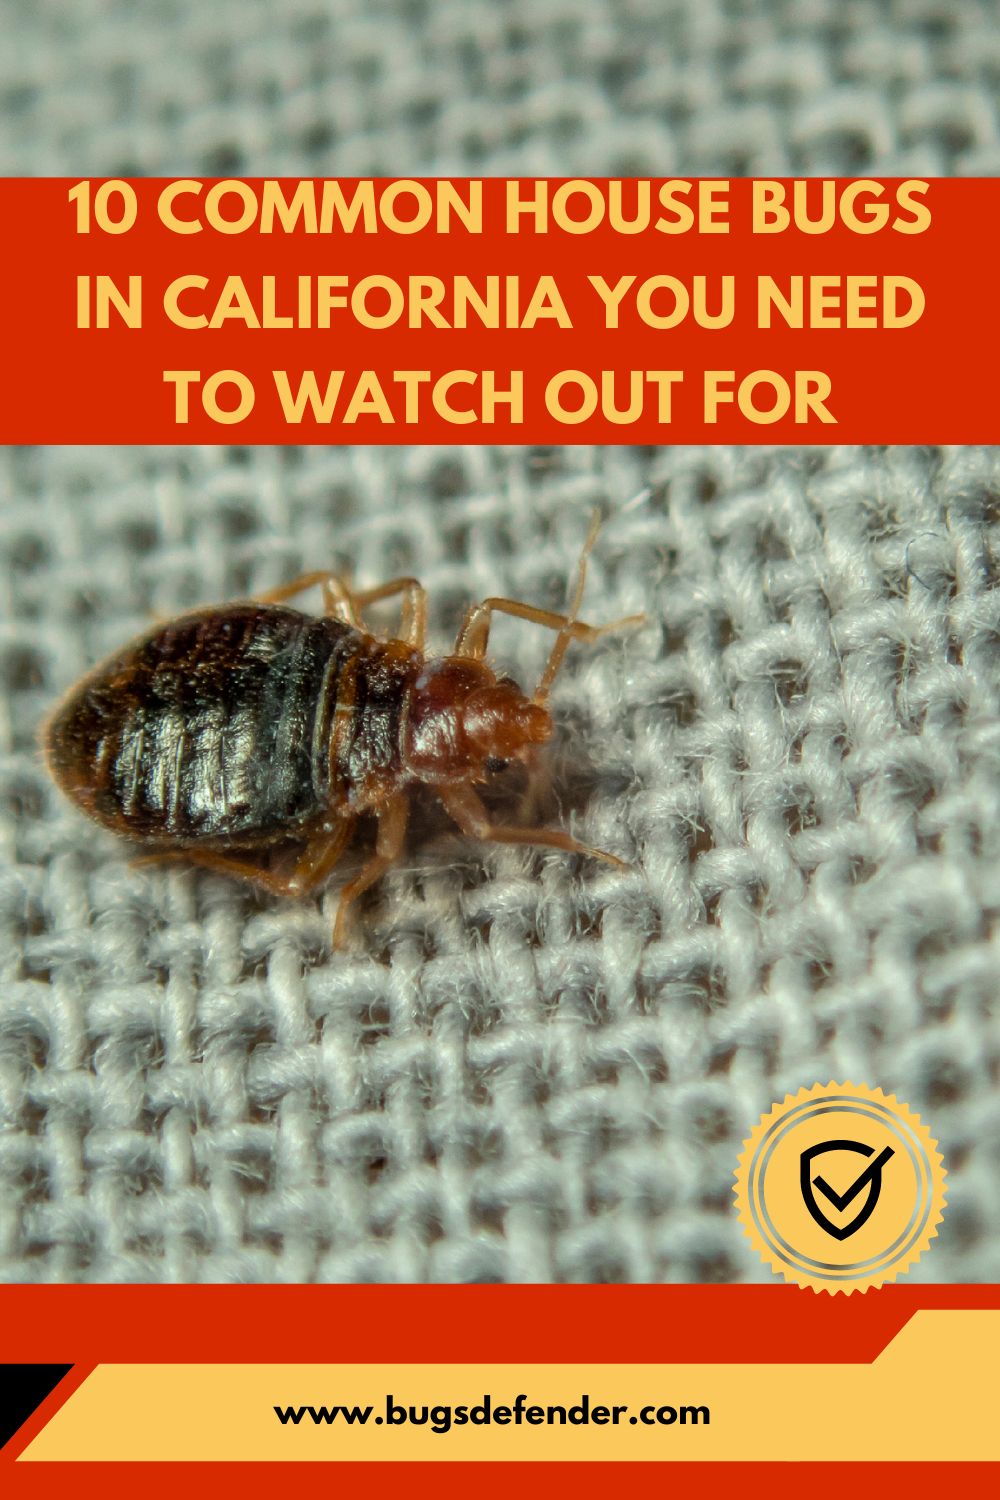 10 Common House Bugs In California You Need To Watch Out For pin 1